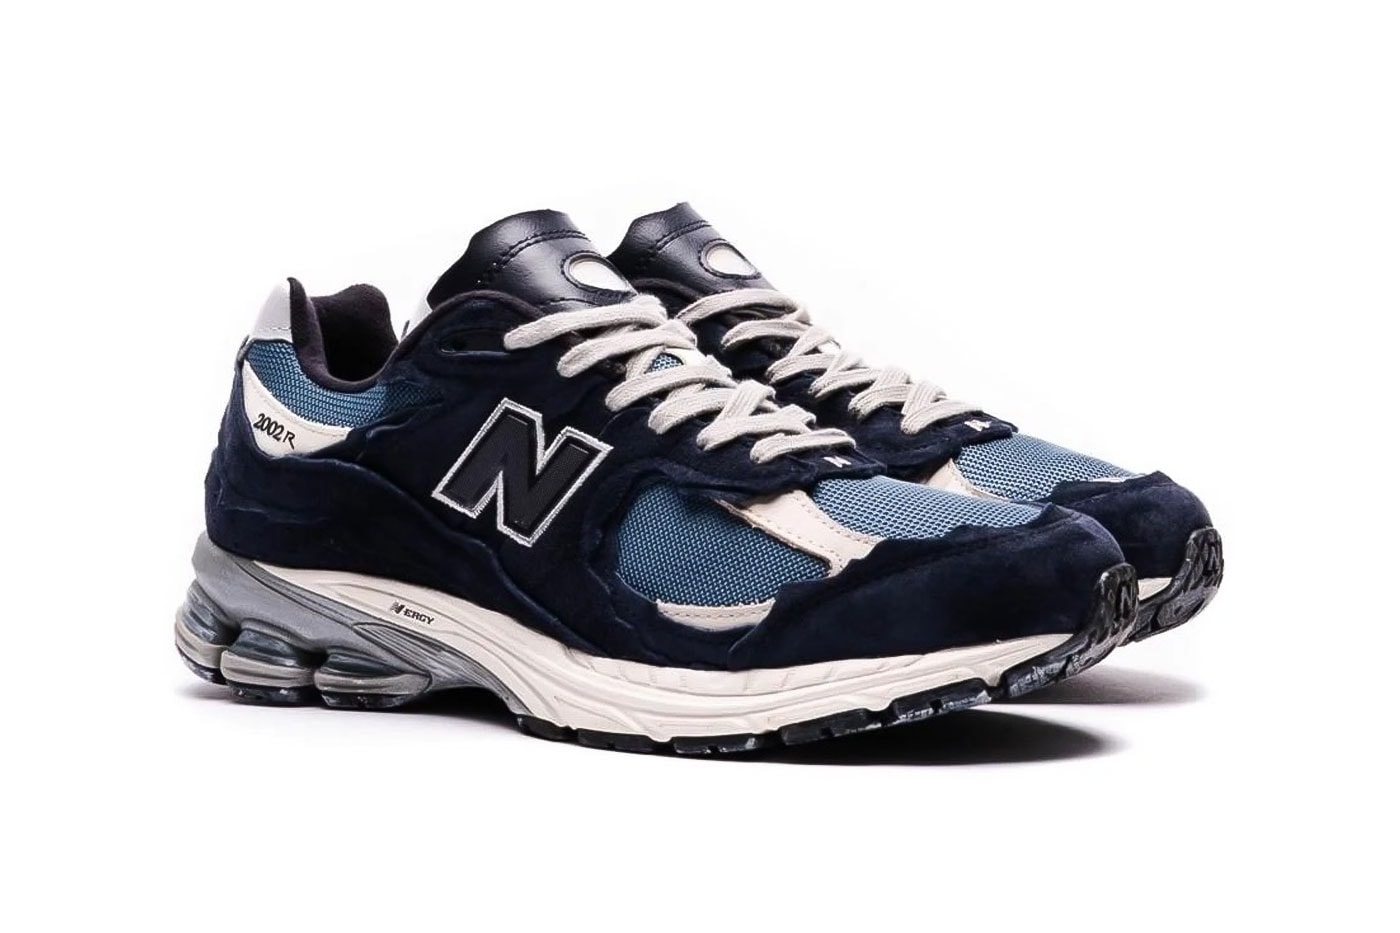 New Balance 2002R Protection Pack Refined Future north america september 29 private label extra butter wabi sabi mirage grey dark navy vintage orange release info date price